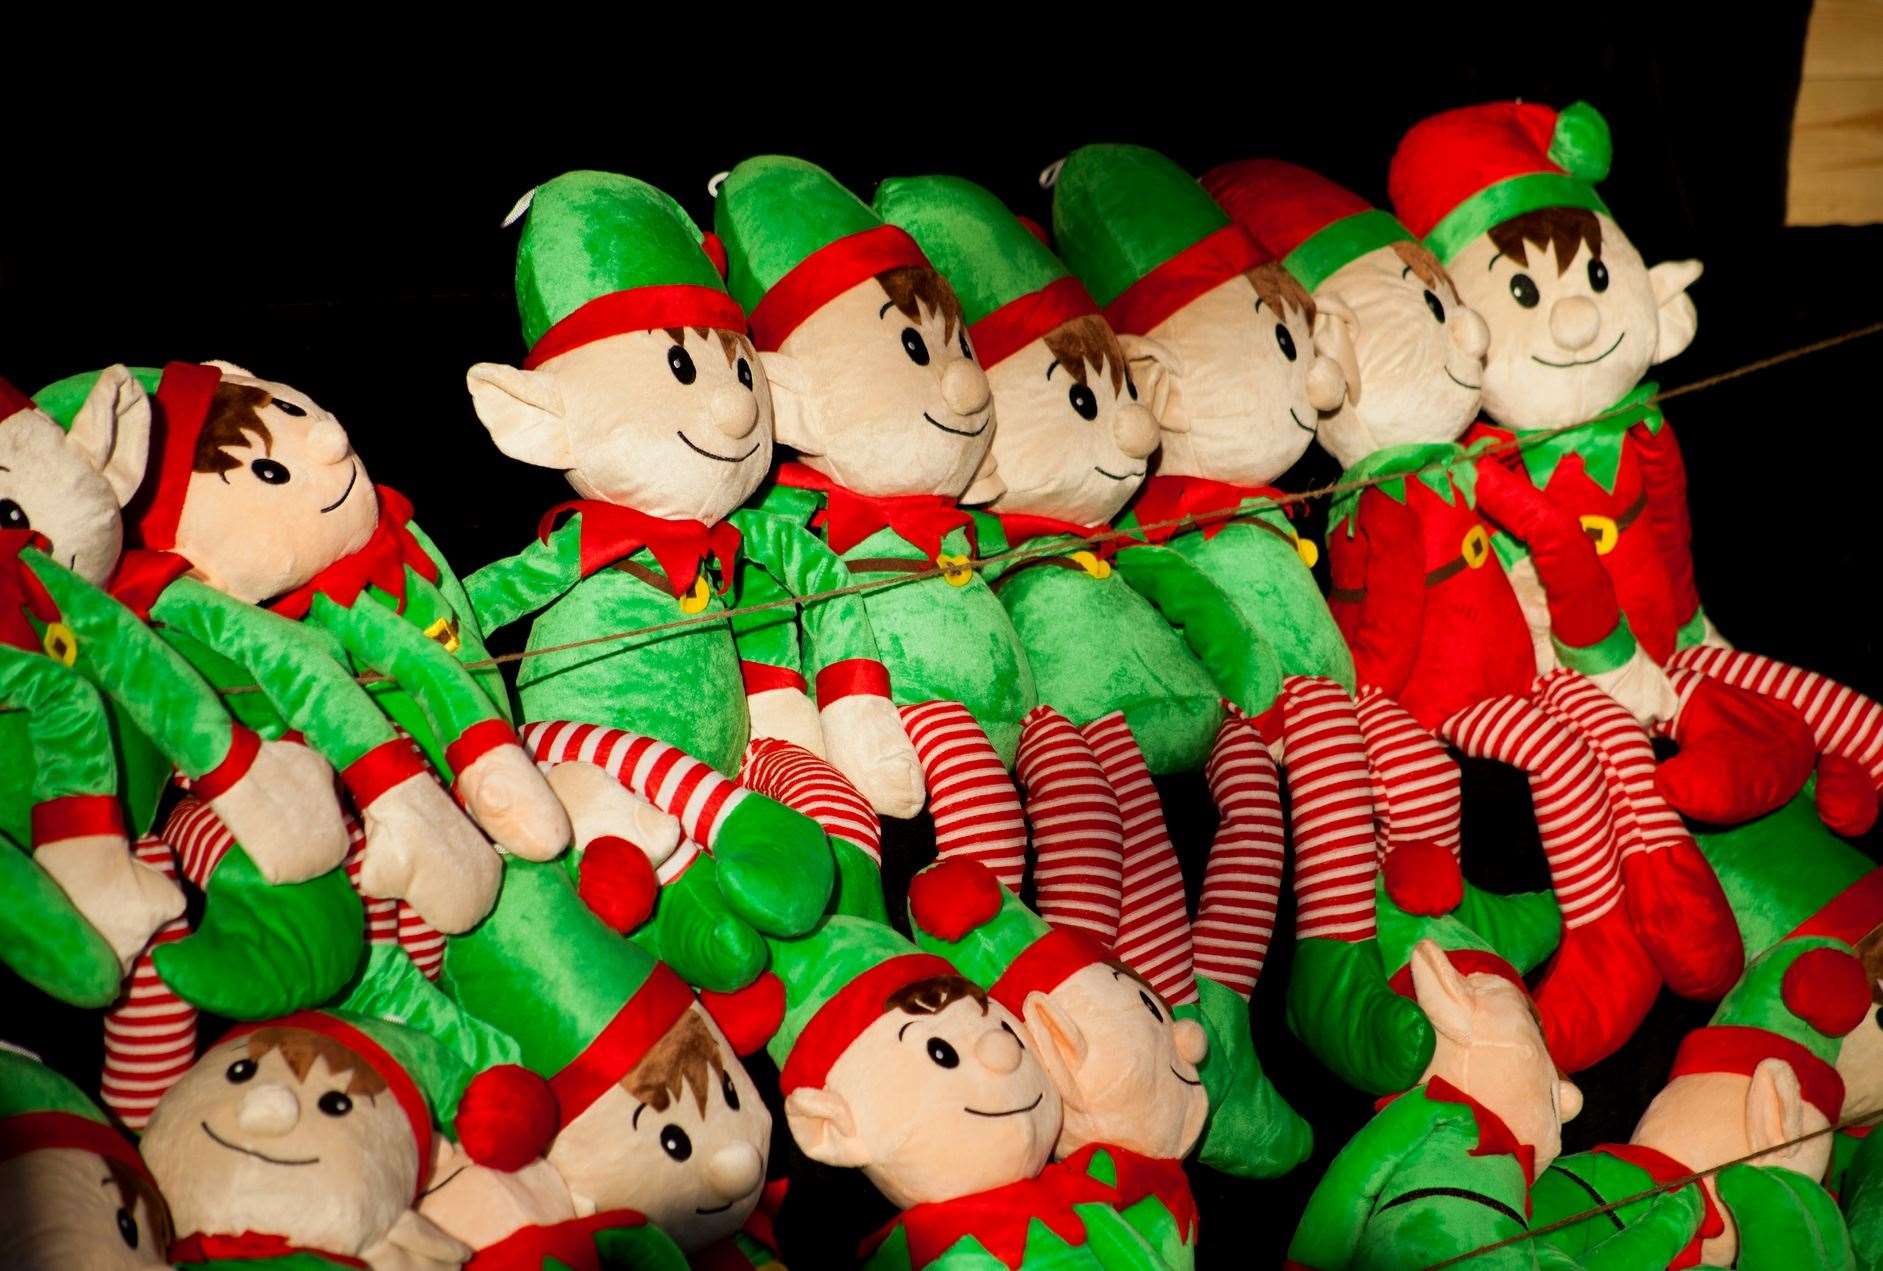 Hundreds of elves are getting ready to arrive from December 1. Credit: iStock/Joannakaczuk.